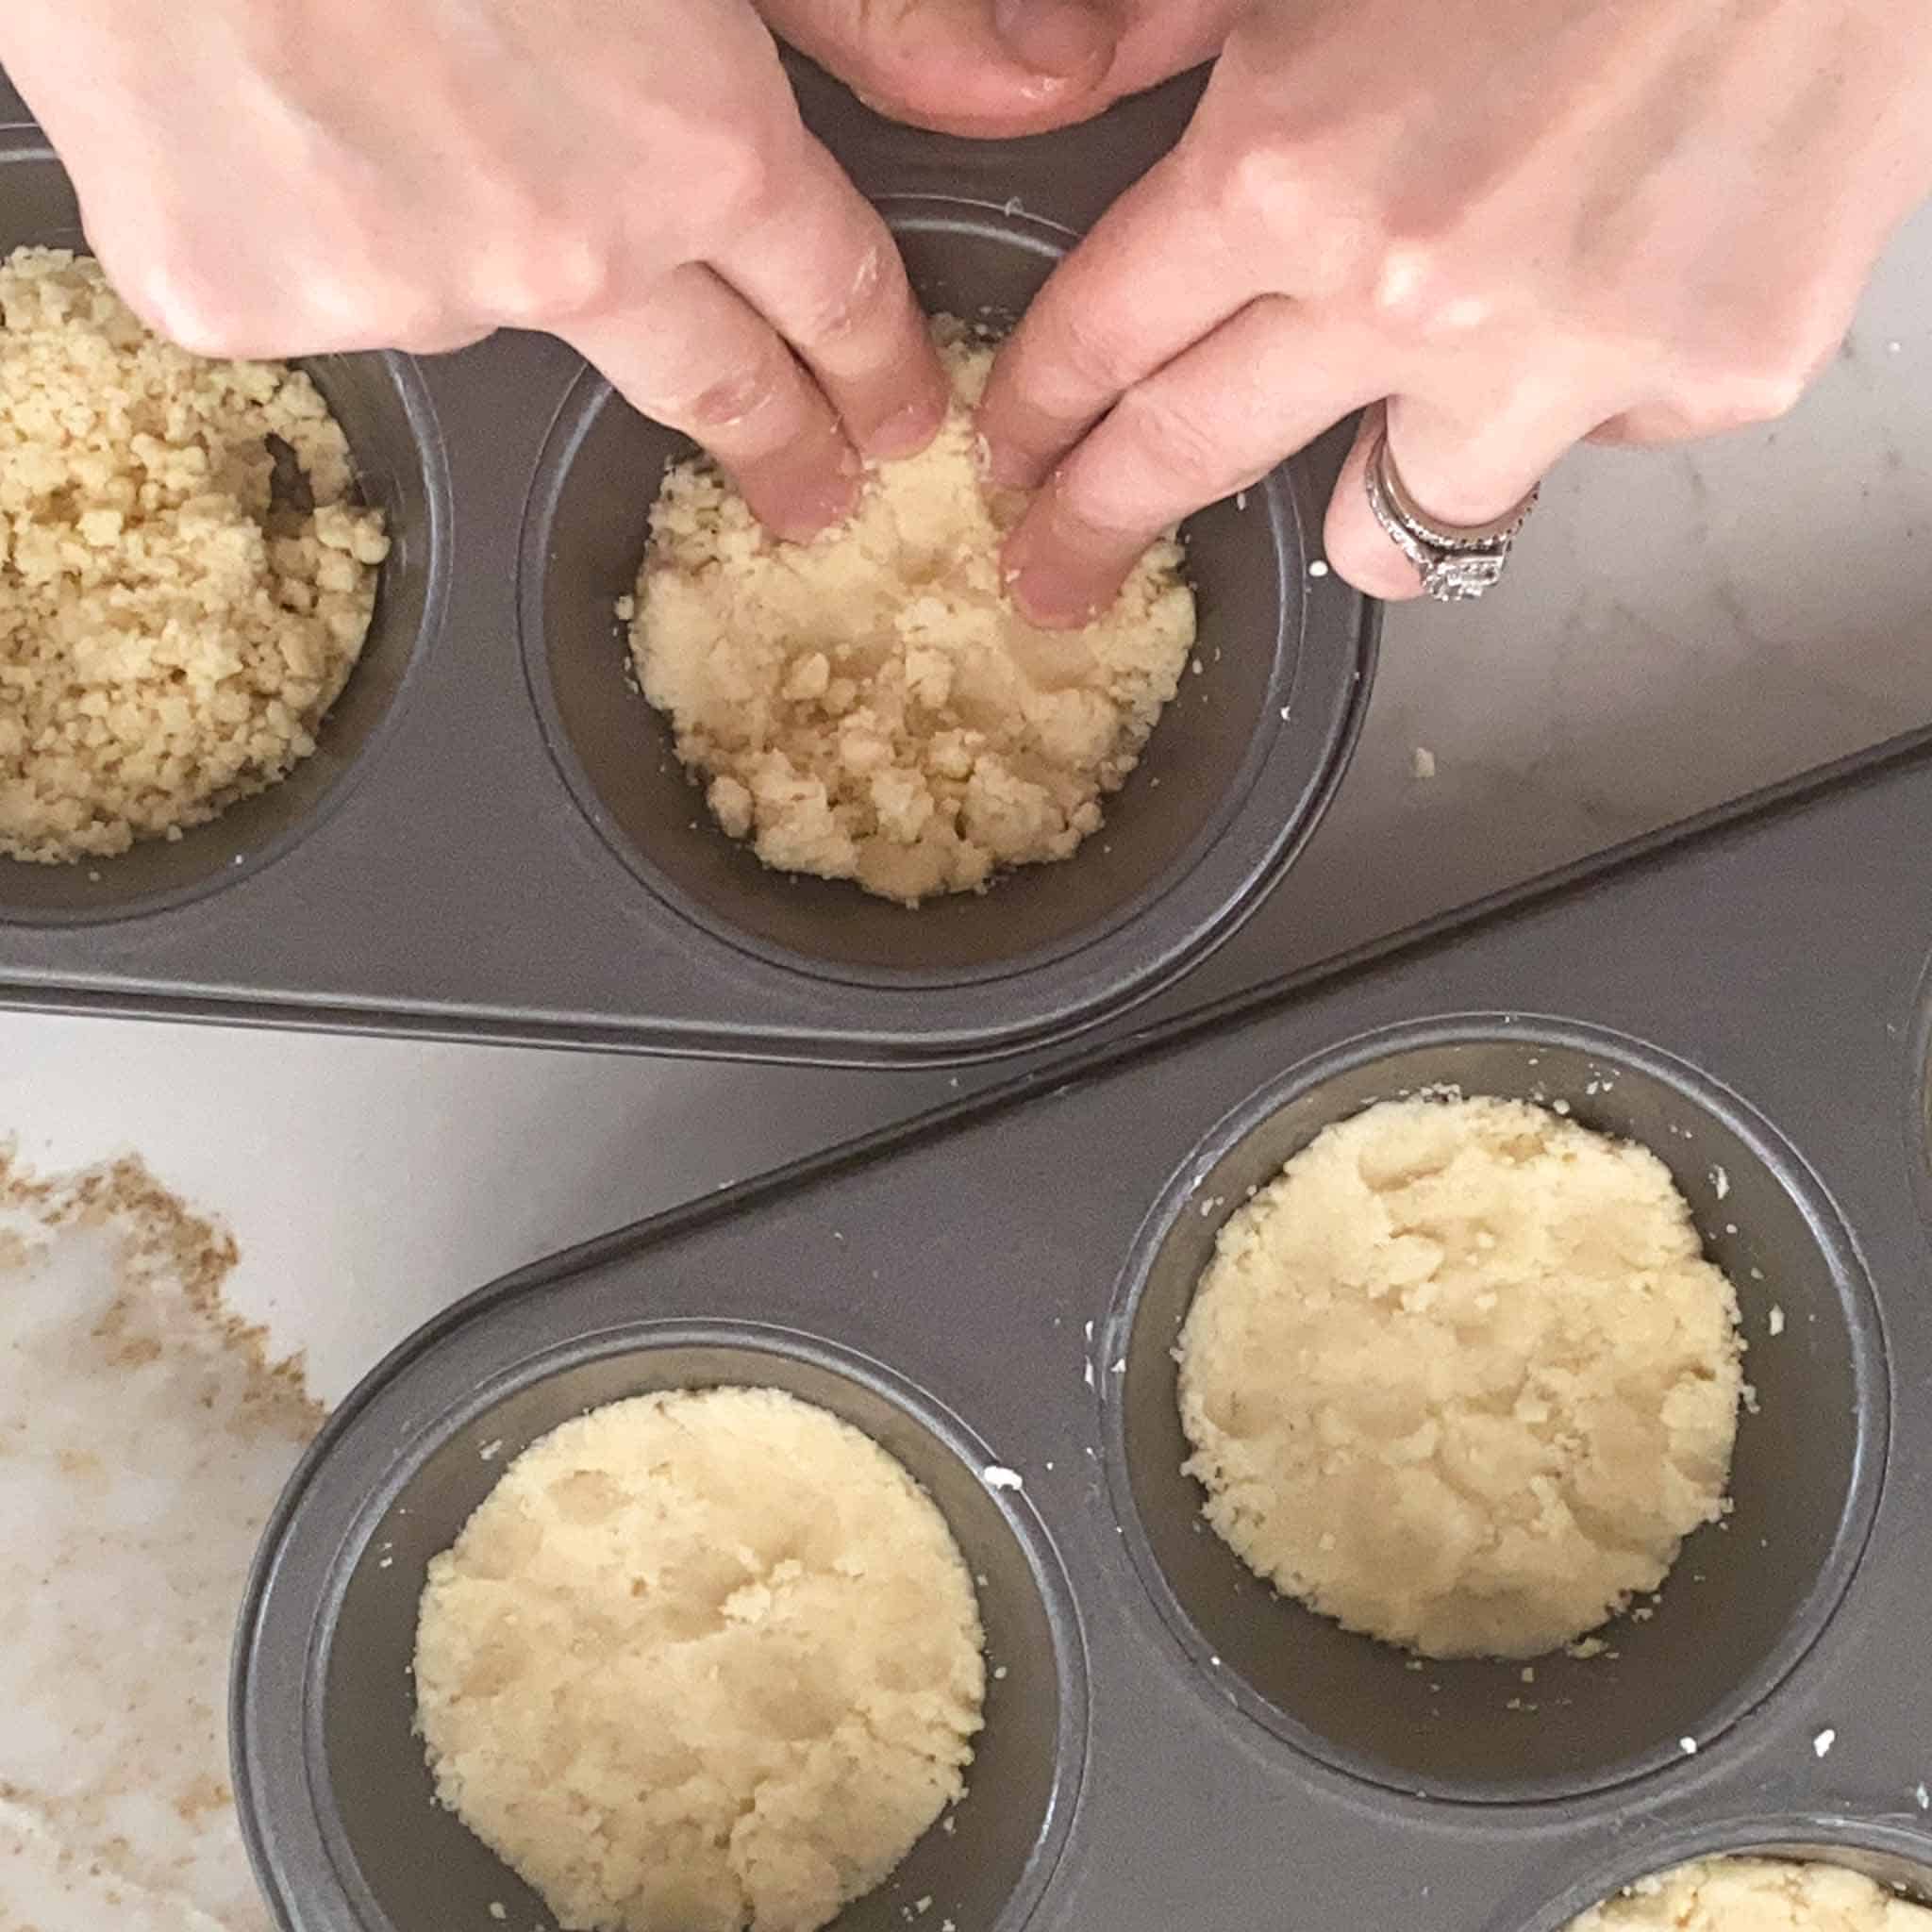 Crumble being packed into jumbo muffin tins.